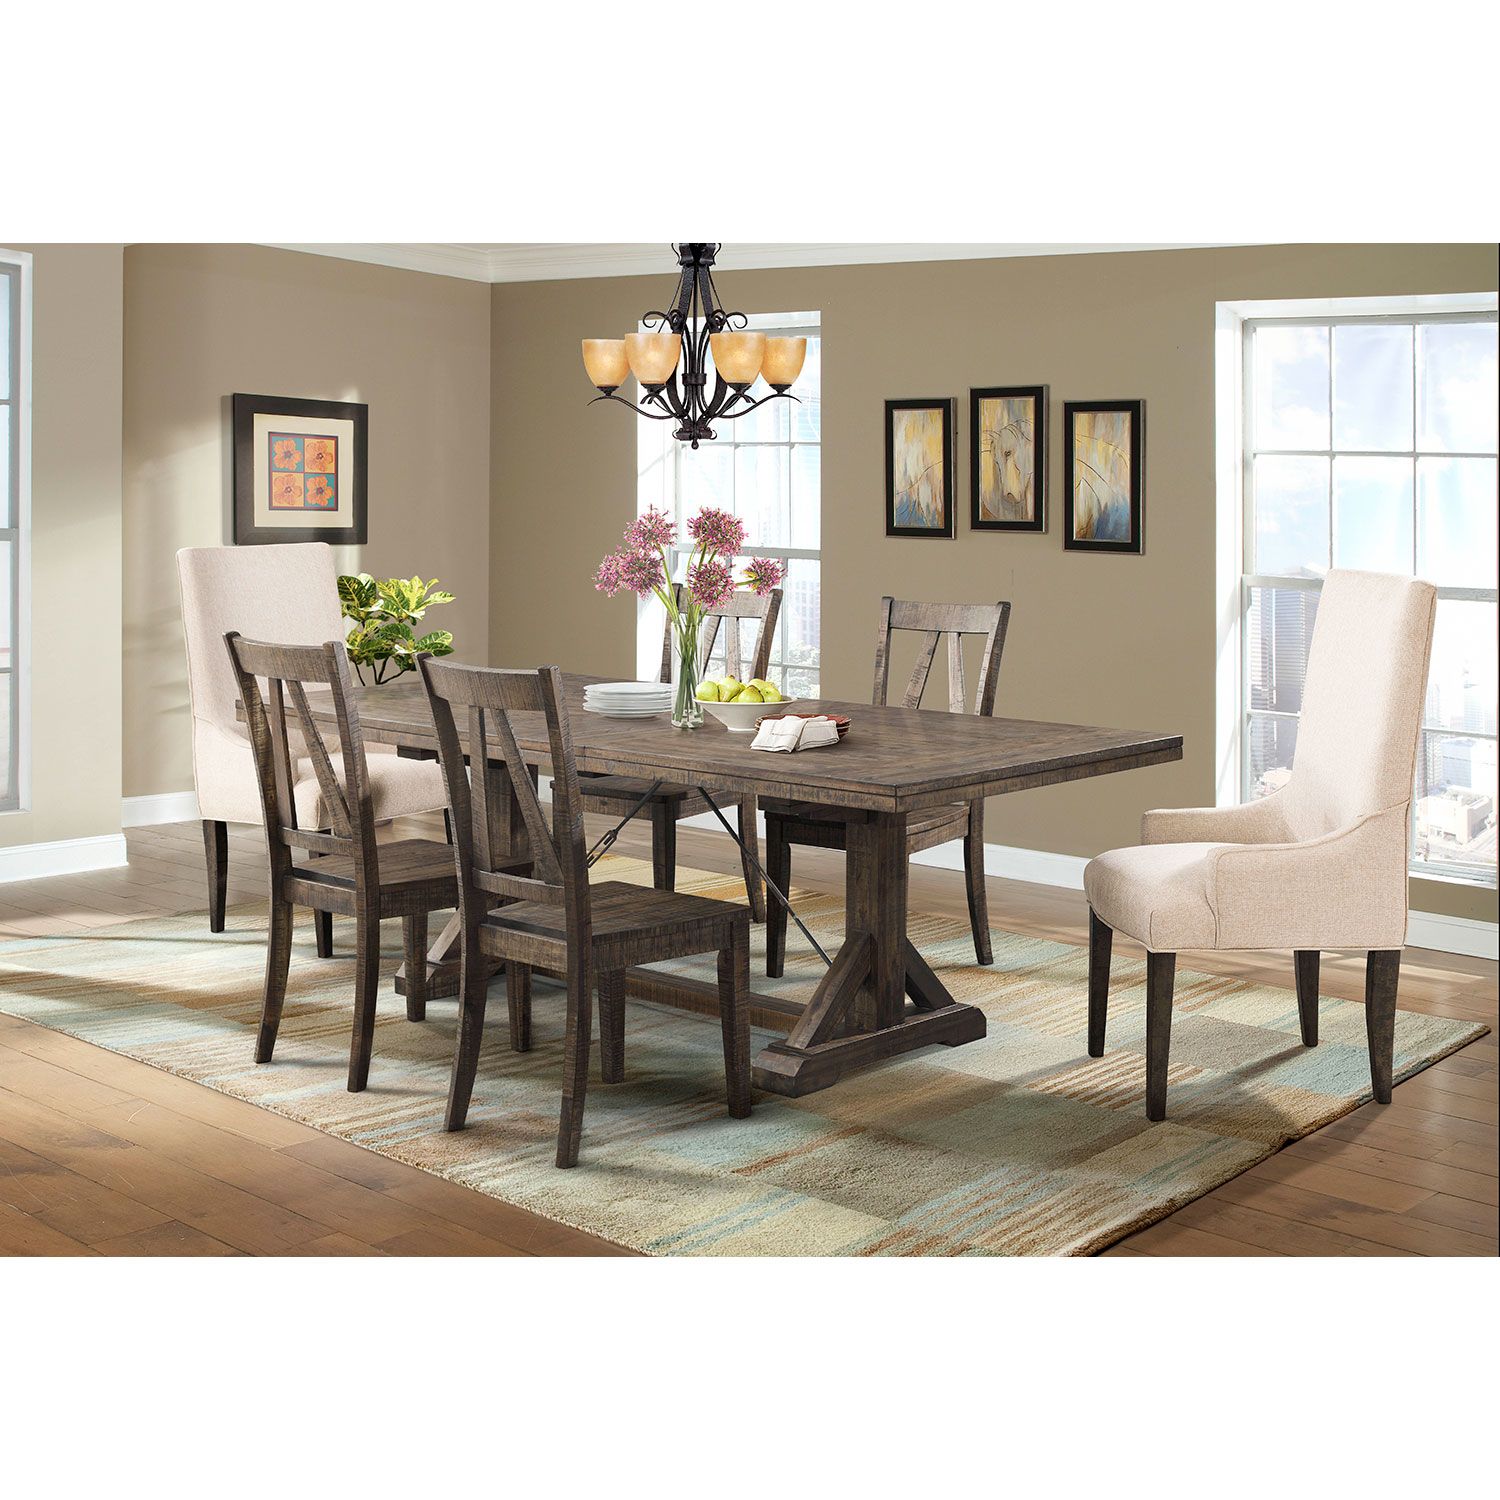 Flynn 7 Piece Dining Set with Table, 4 Side Chairs and 2 Parson Chairs